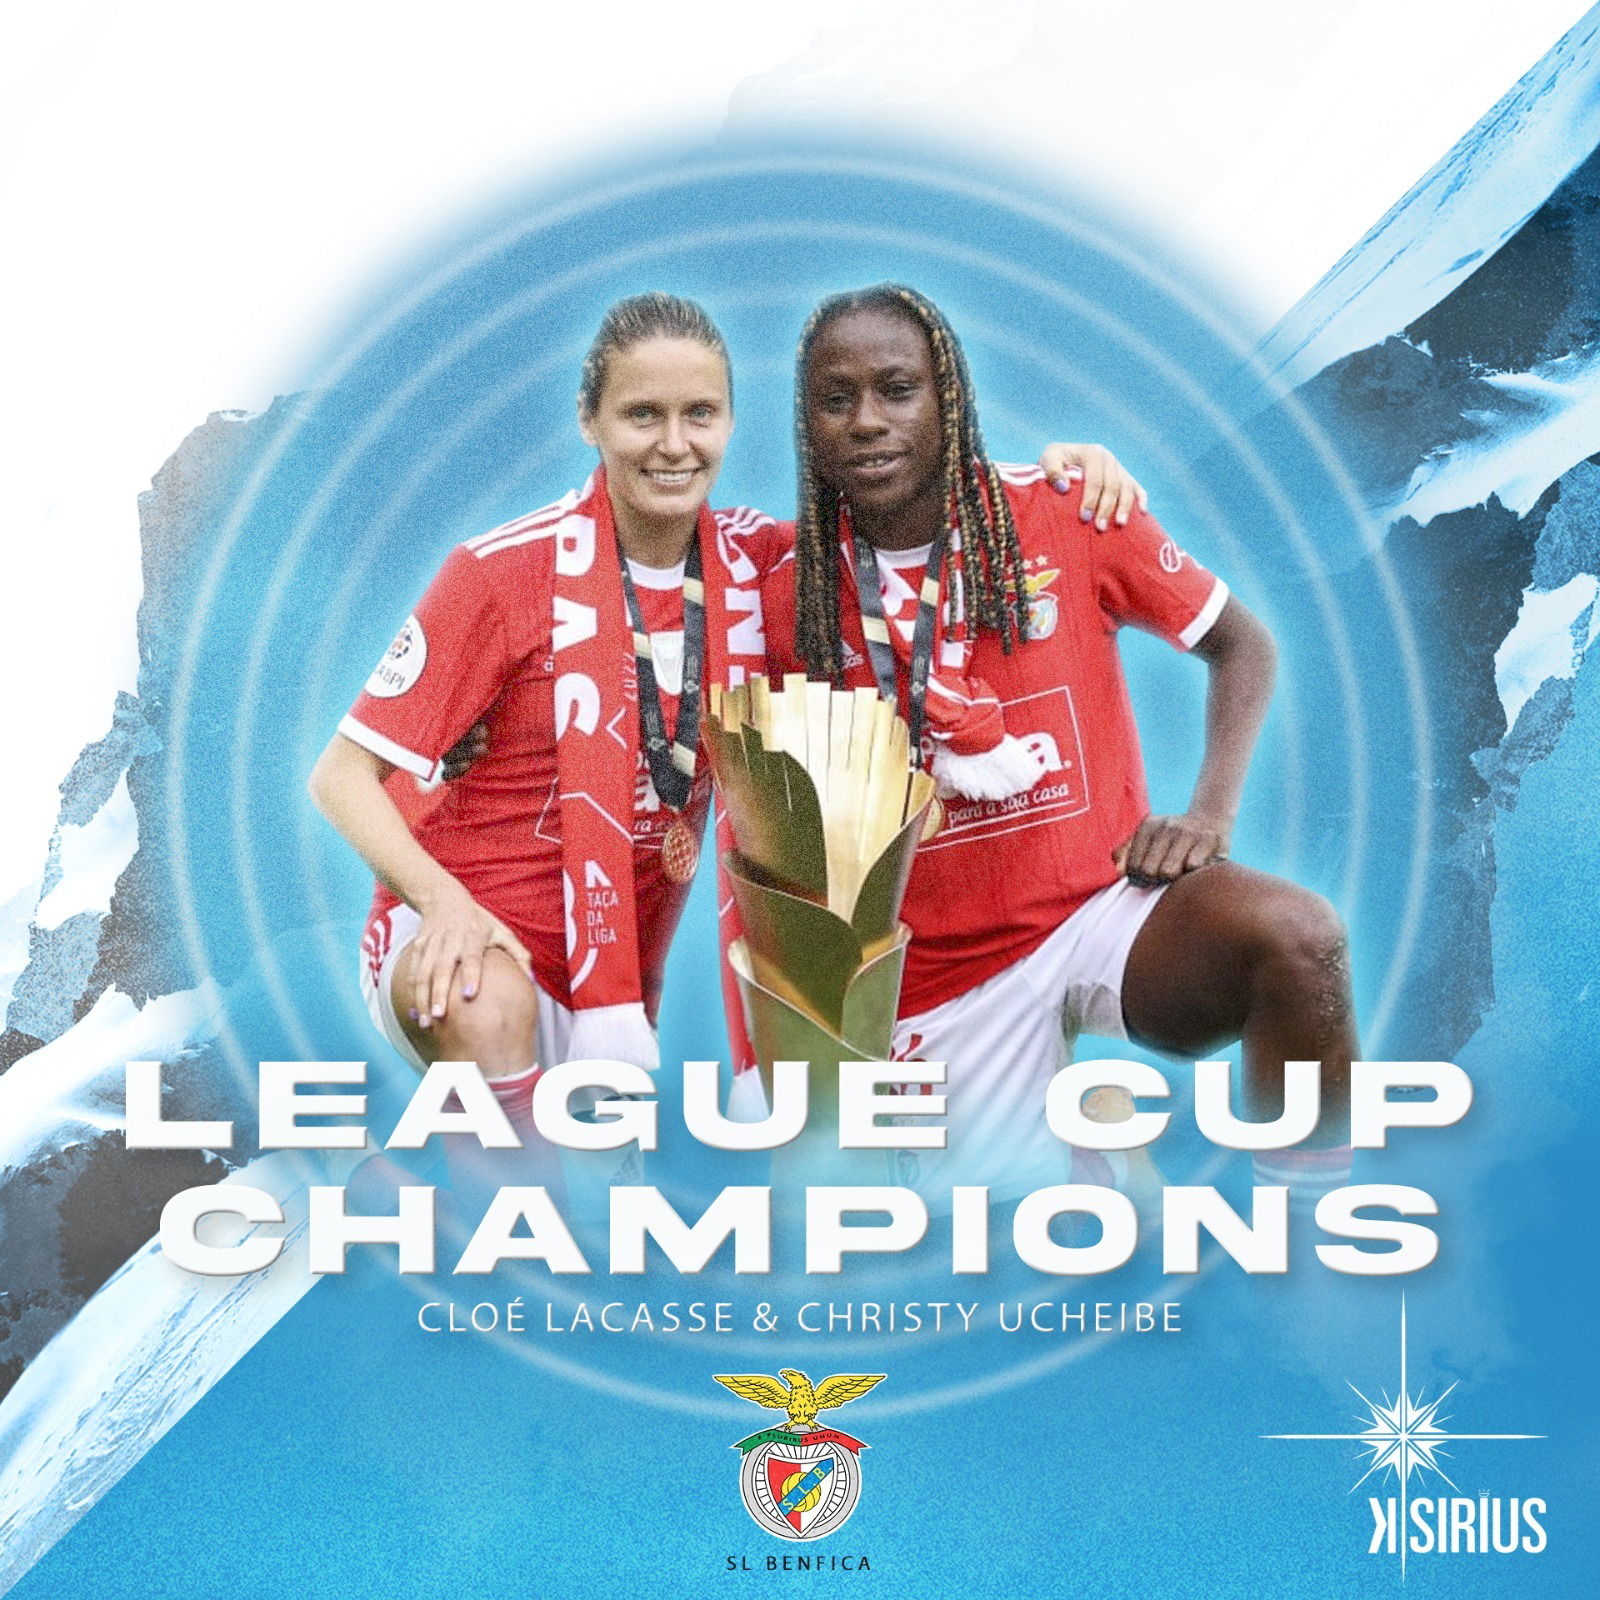 League Cup Champions: Cloé Lacasse (SL Benfica) and Christy Ucheibe (SL Benfica)